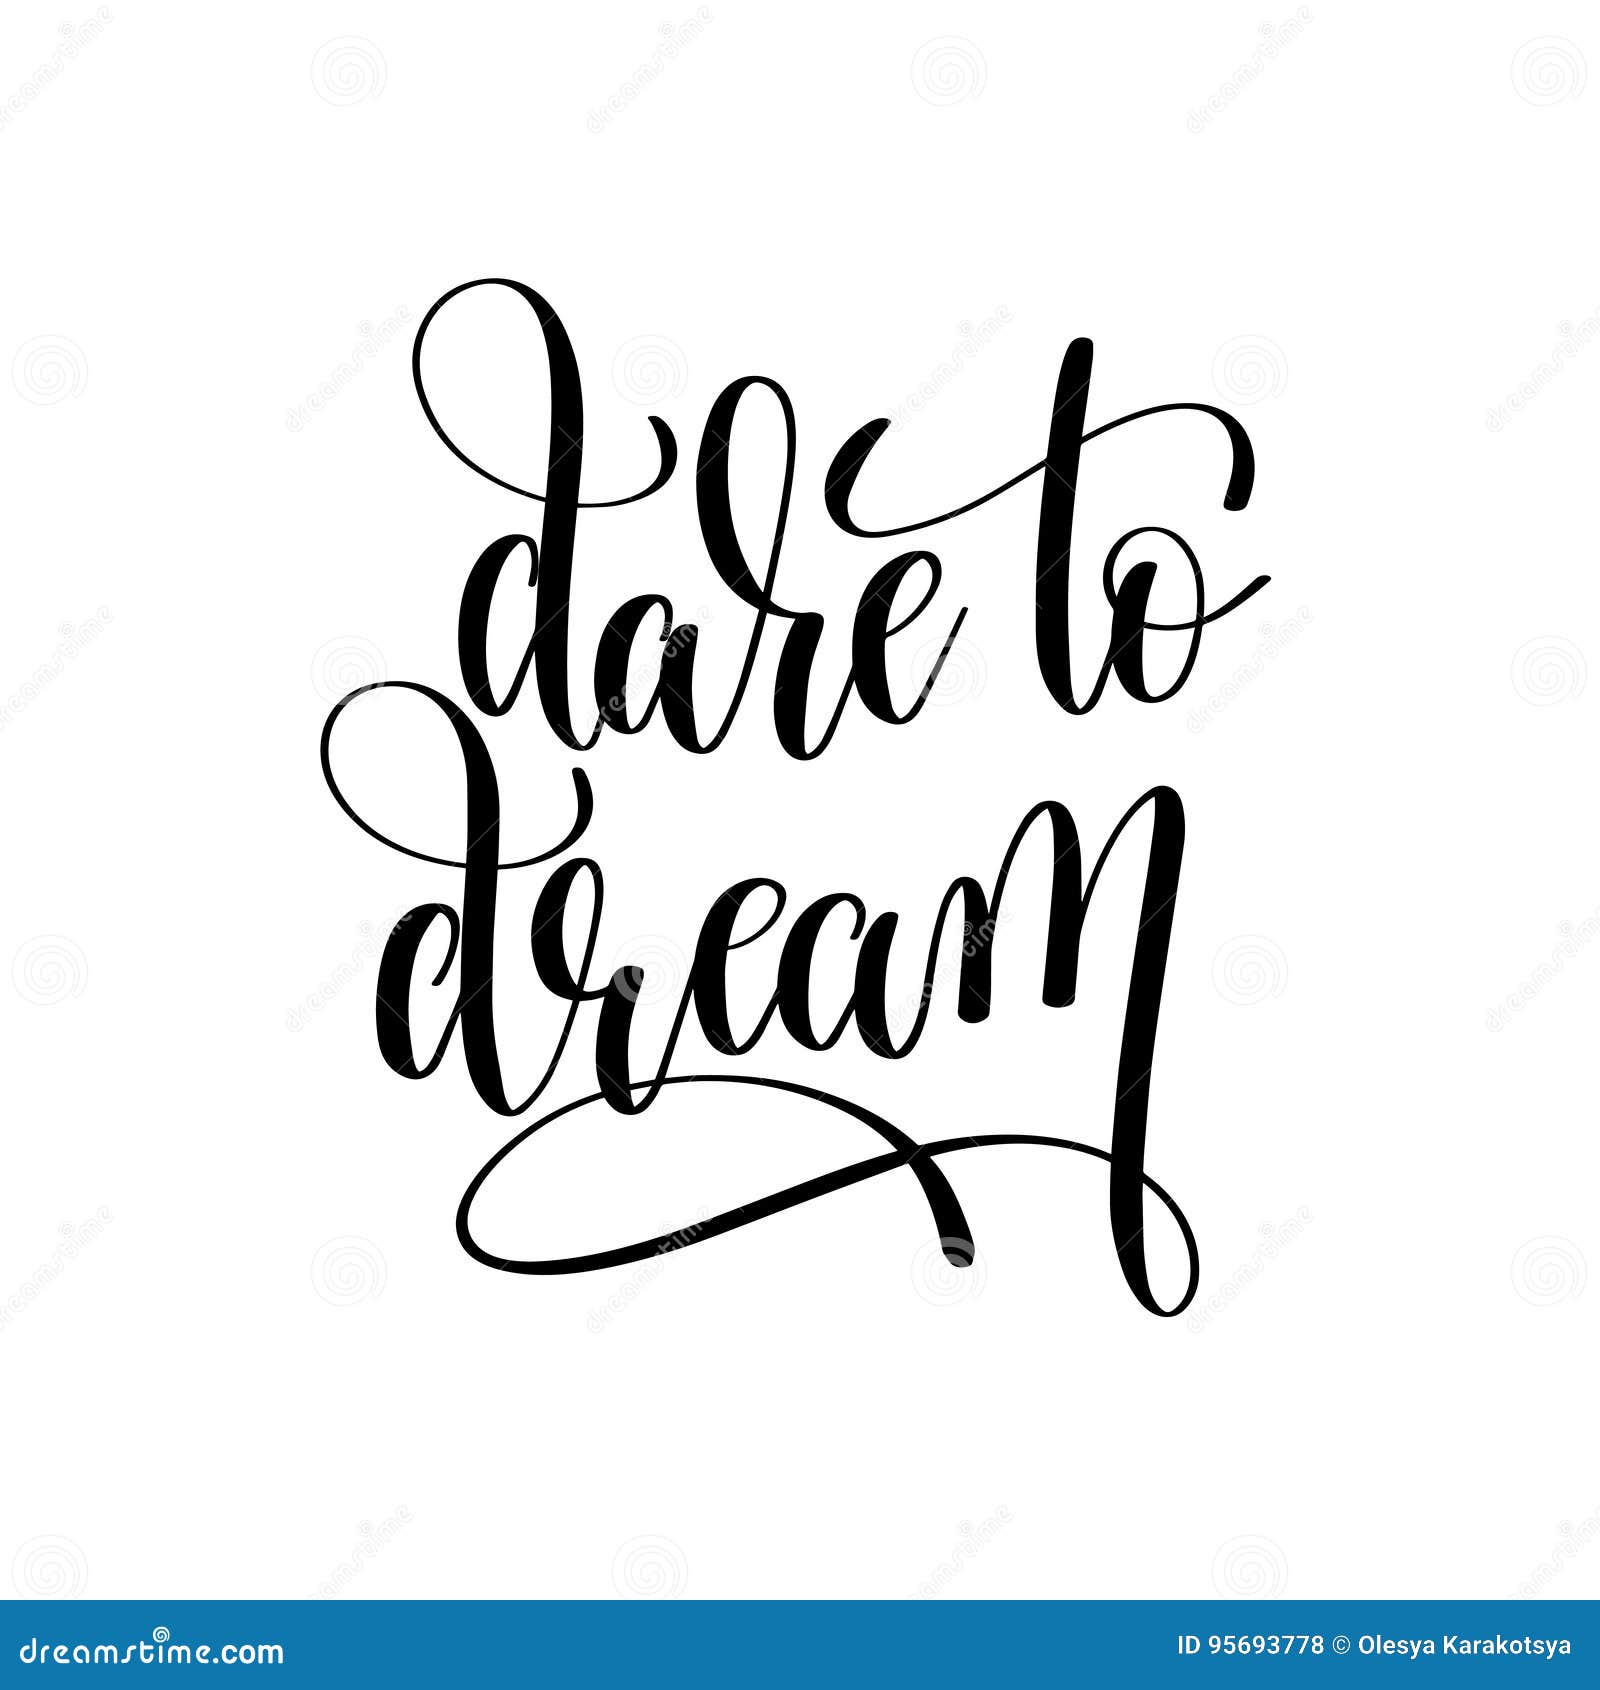 Download Dare To Dream Black And White Hand Lettering Positive ...